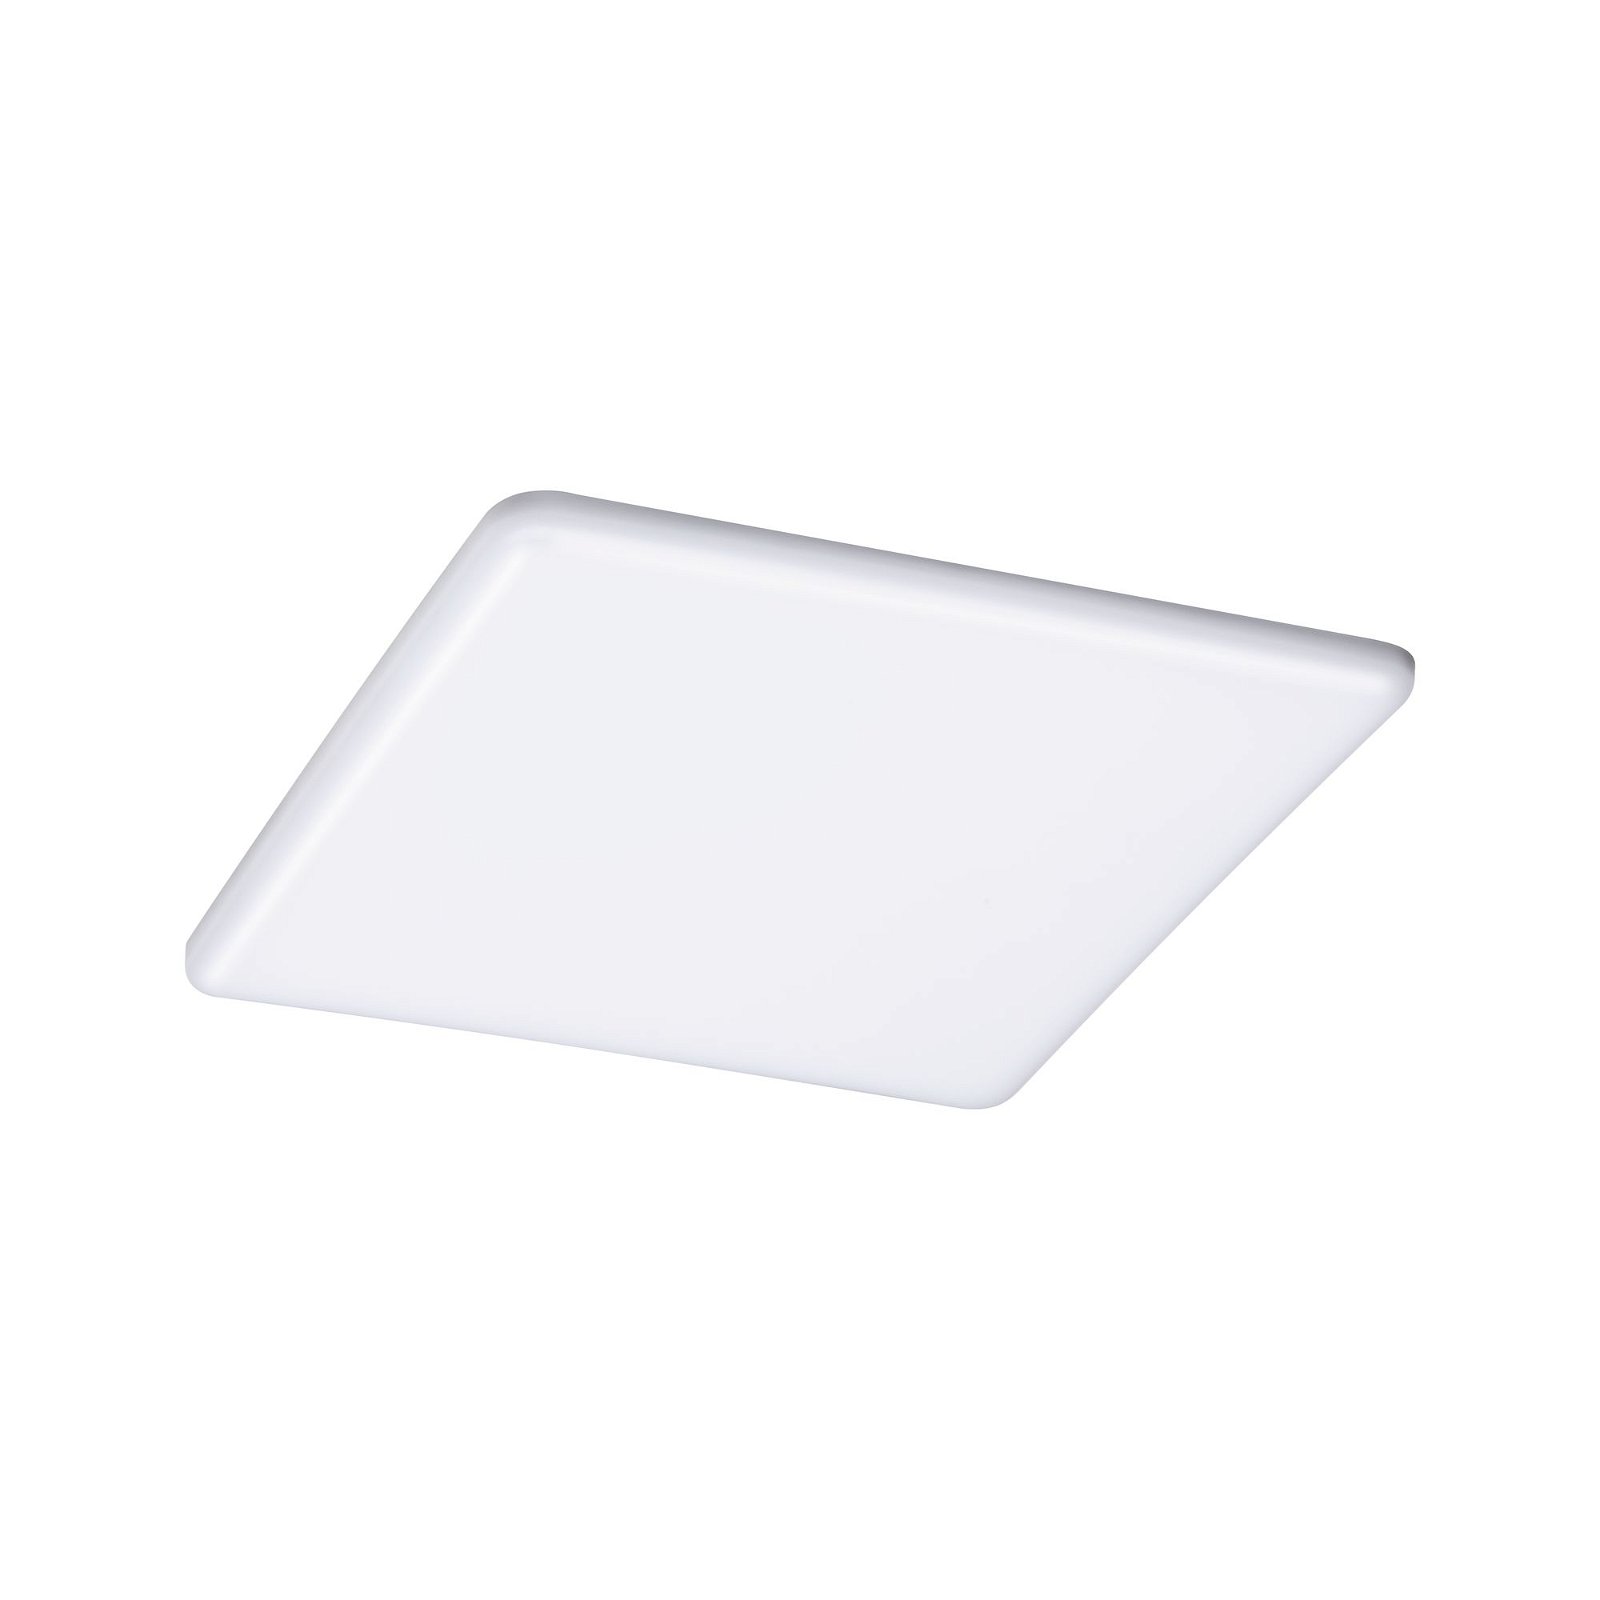 VariFit LED Recessed panel Smart Home Zigbee Veluna IP44 square 215x215mm 17W 1300lm Tunable White Satin dimmable